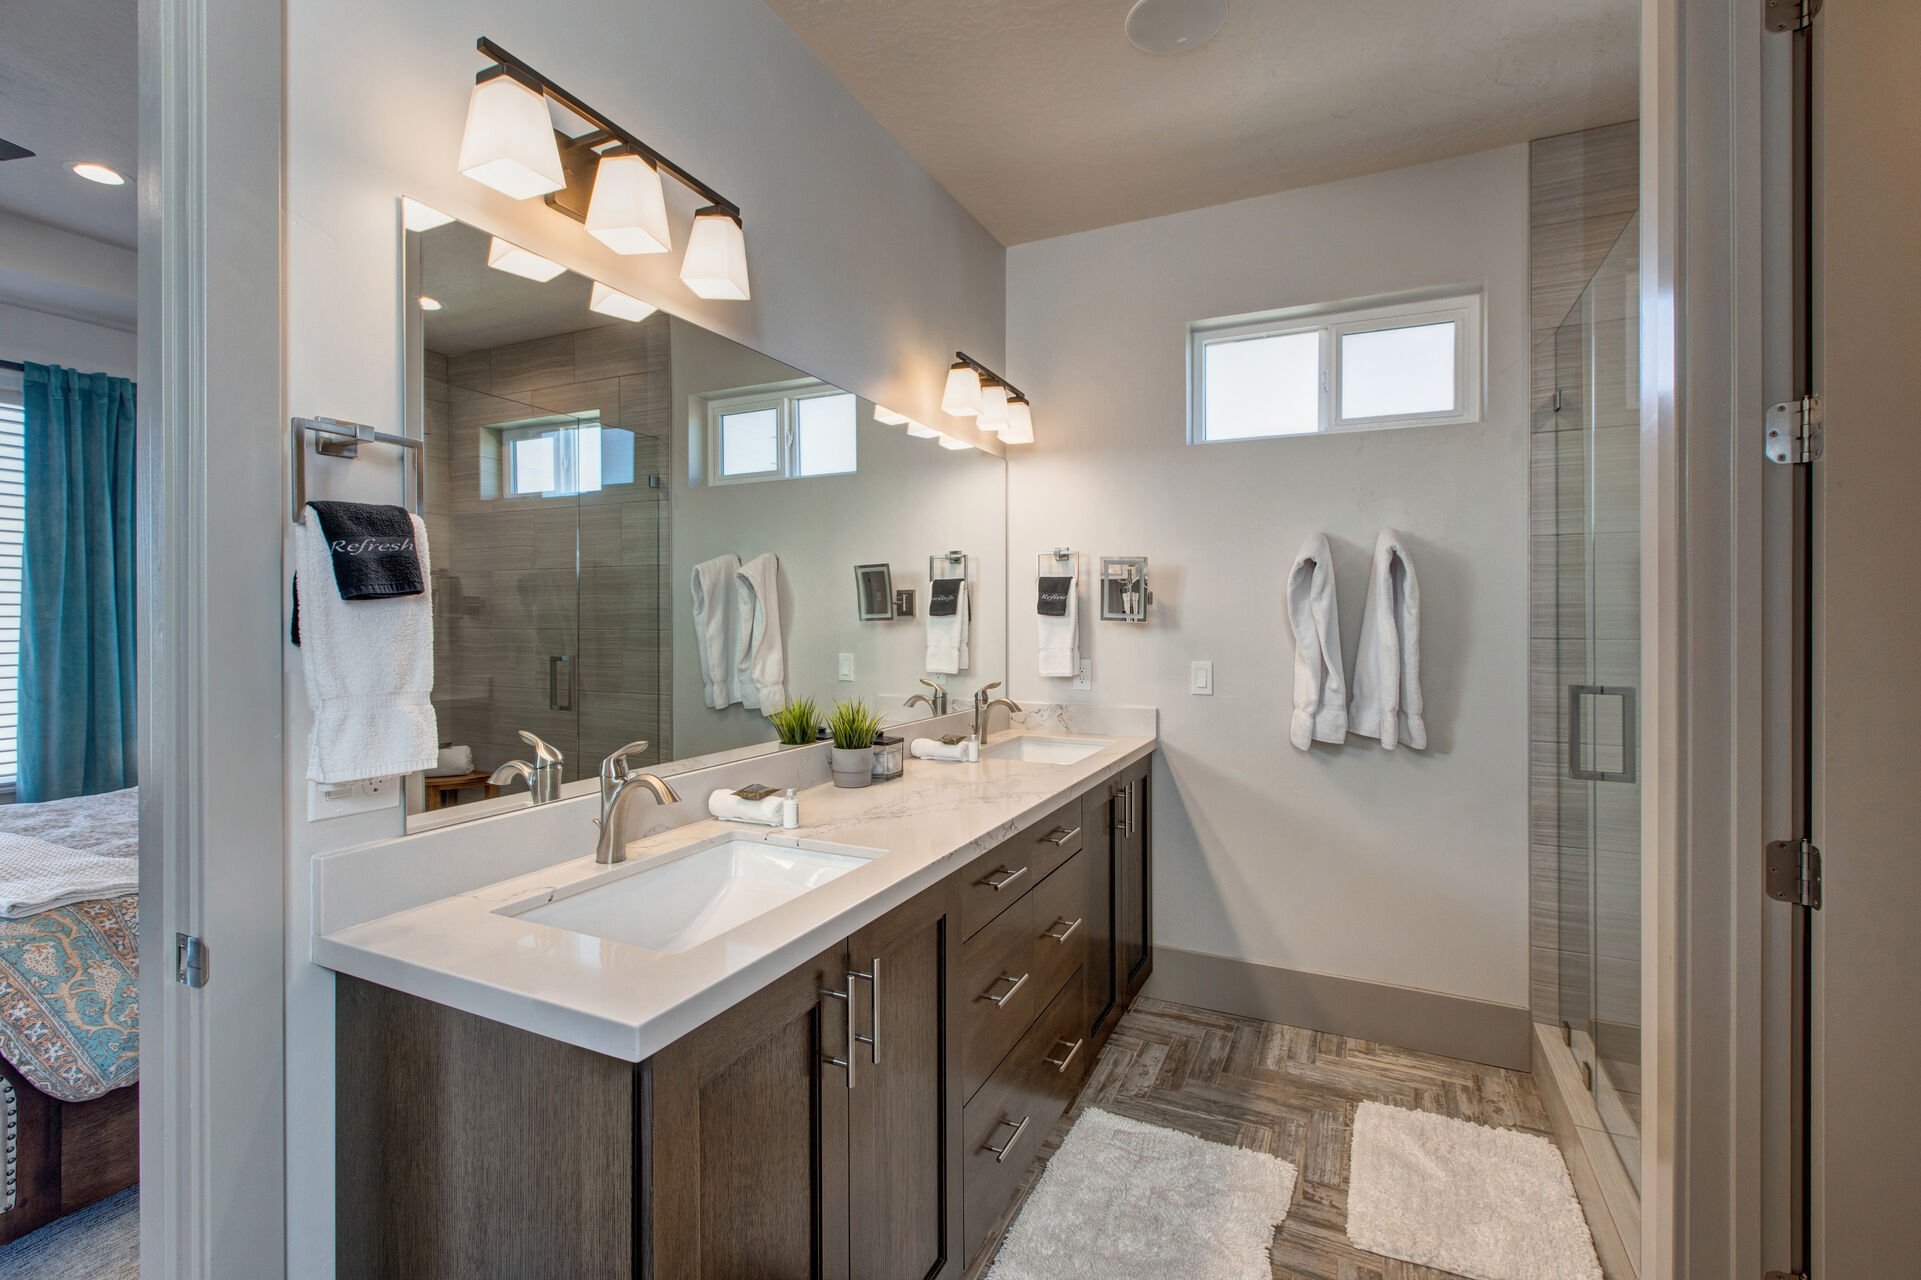 Master Bathroom with double sinks, large soaking tub, over-sized shower with seating, walk-in closet, and separate washroom